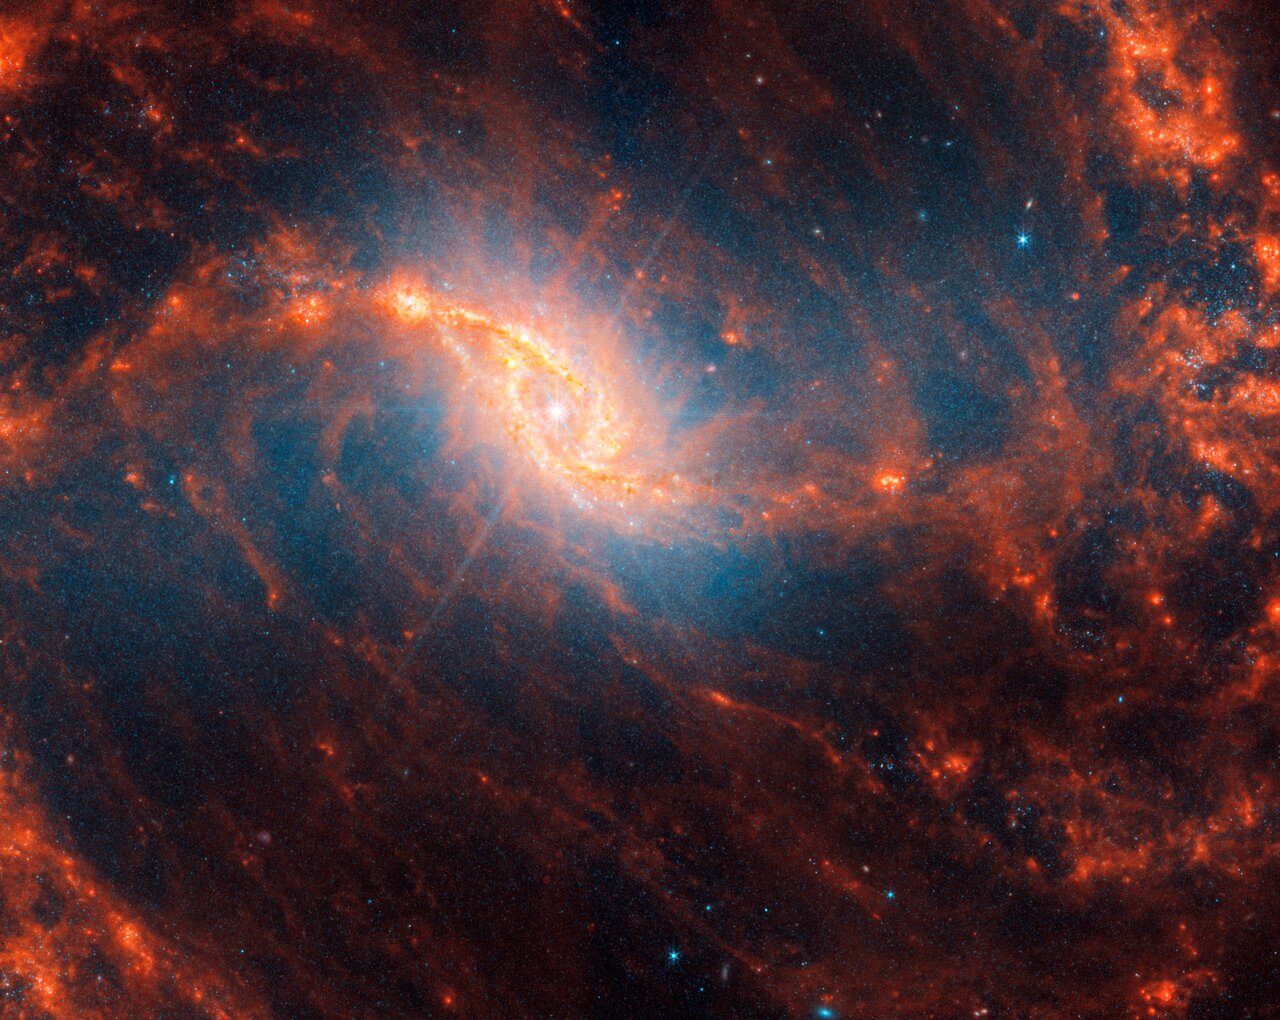 The spiral galaxy NGC 1365, located 56 million light-years away in the constellation Fornax